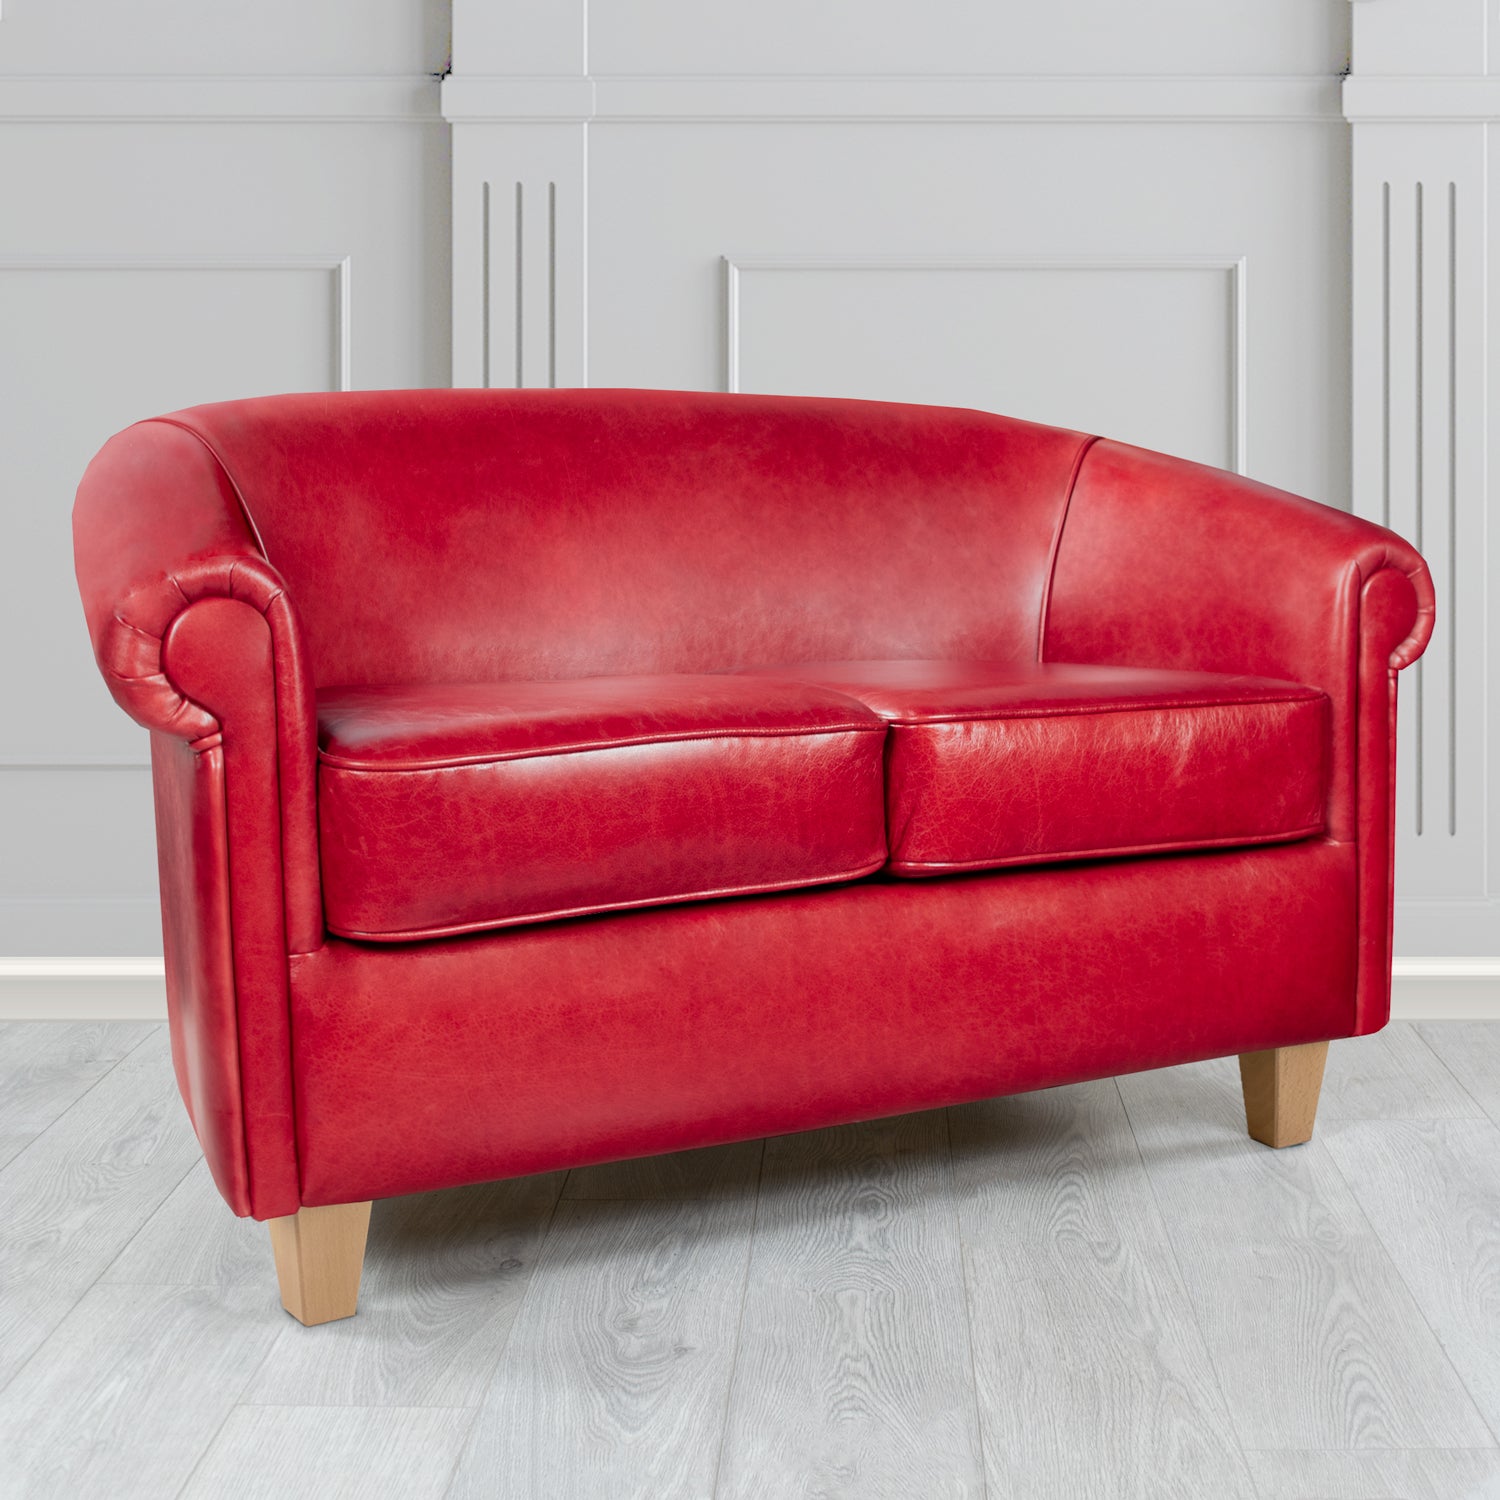 Siena 2 Seater Tub Sofa in Crib 5 Old English Gamay Genuine Leather - The Tub Chair Shop